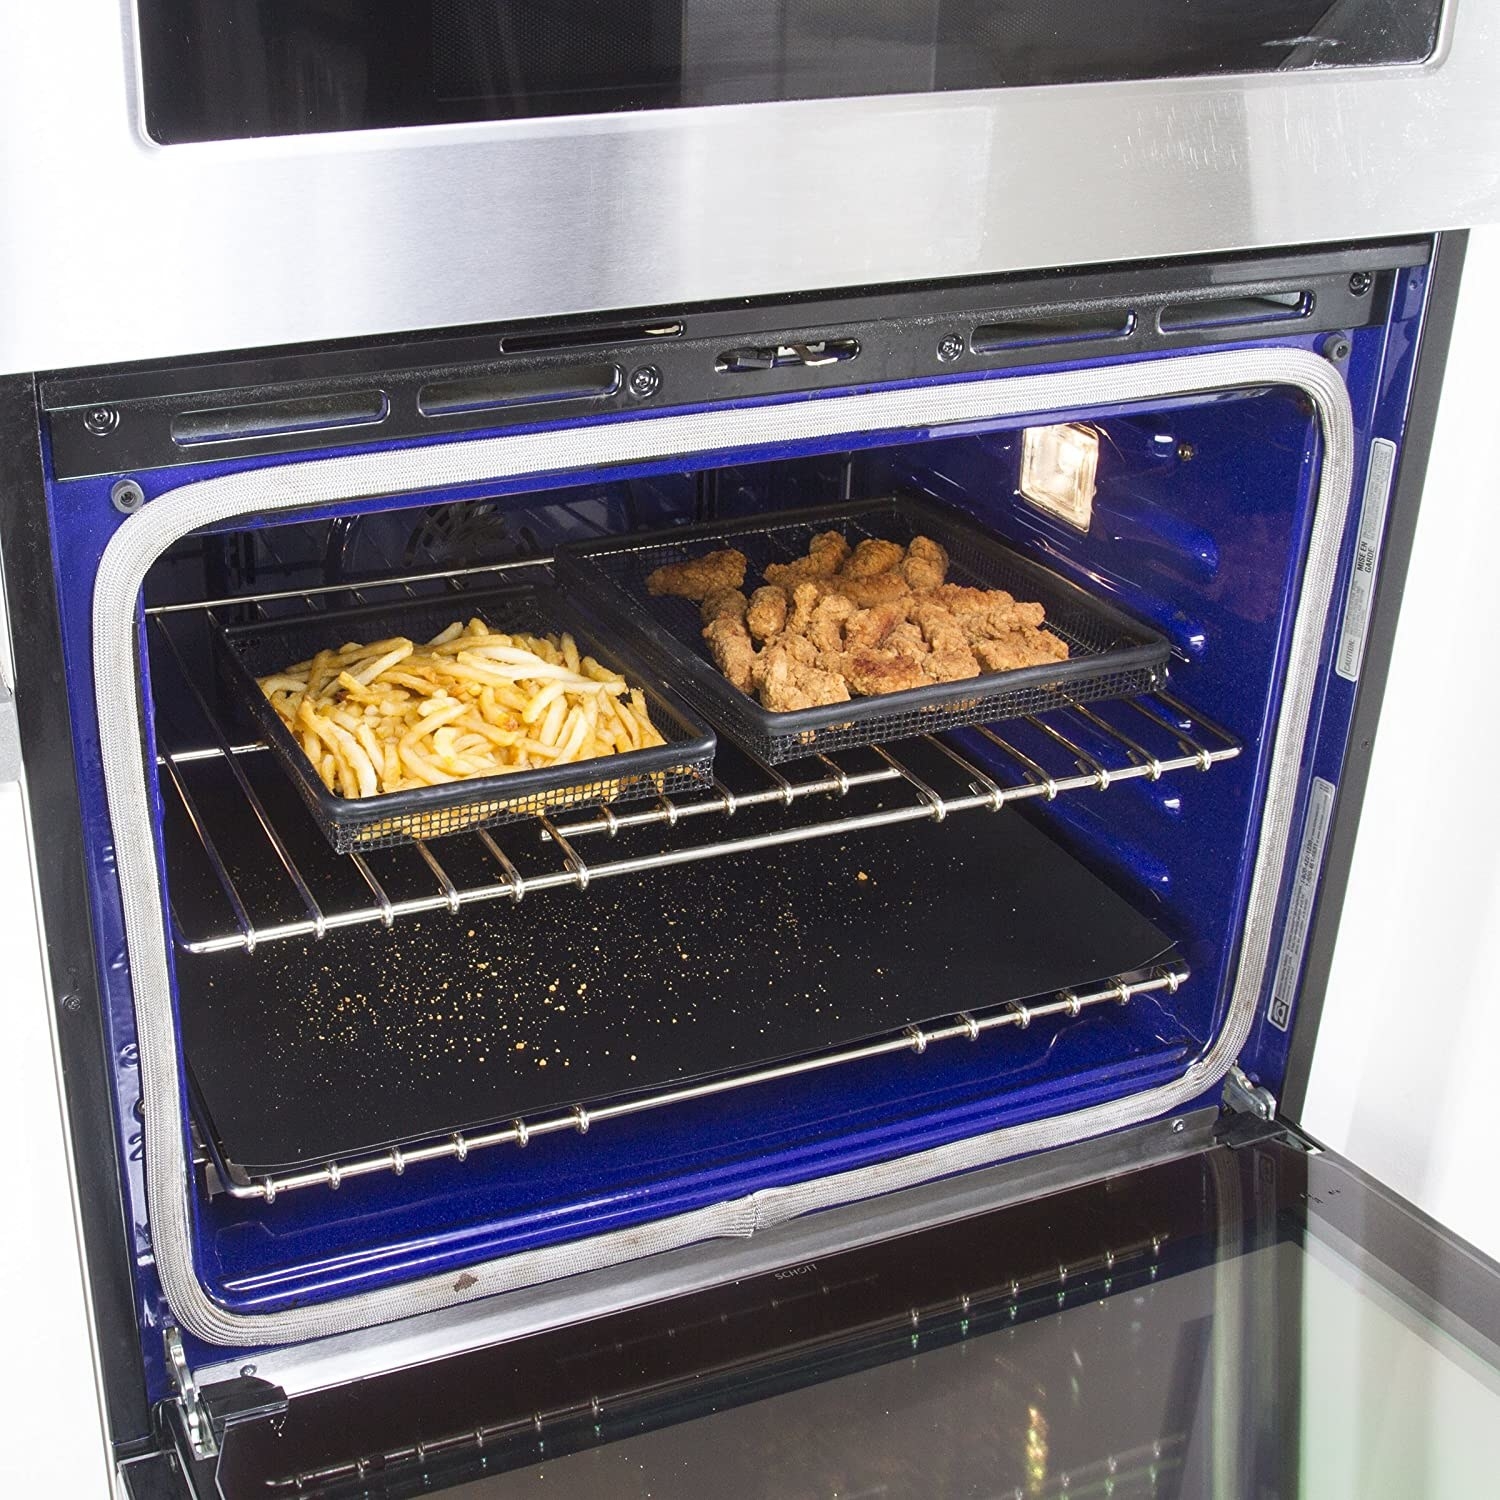 An oven with a liner sheet on the bottom catching crumbs